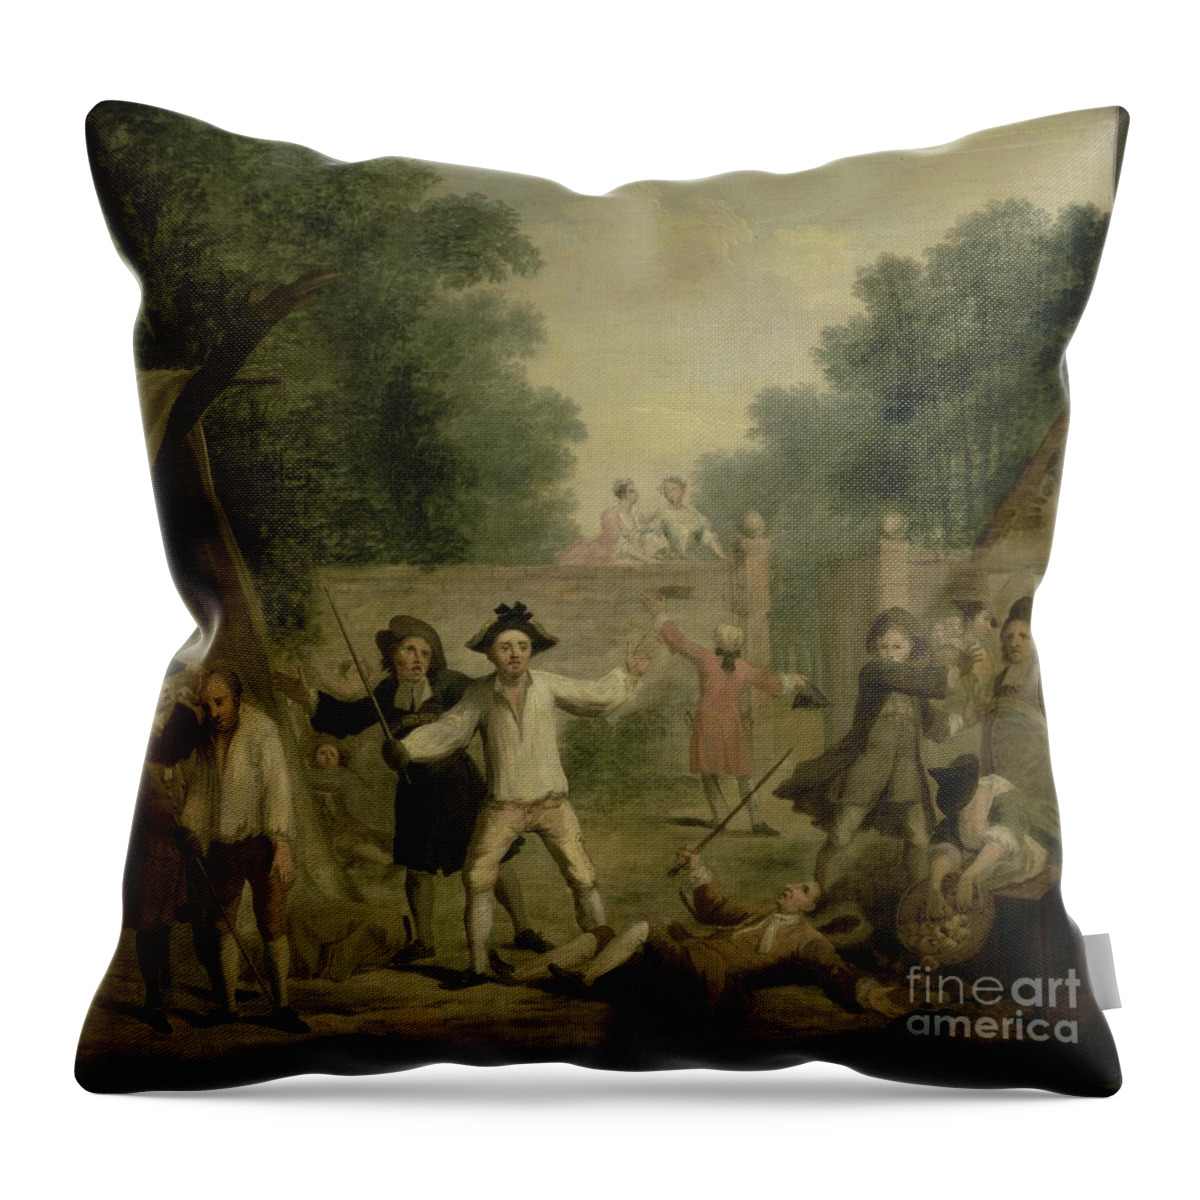 Countryside Throw Pillow featuring the painting Hob's Defence, C.1725 by John Laguerre